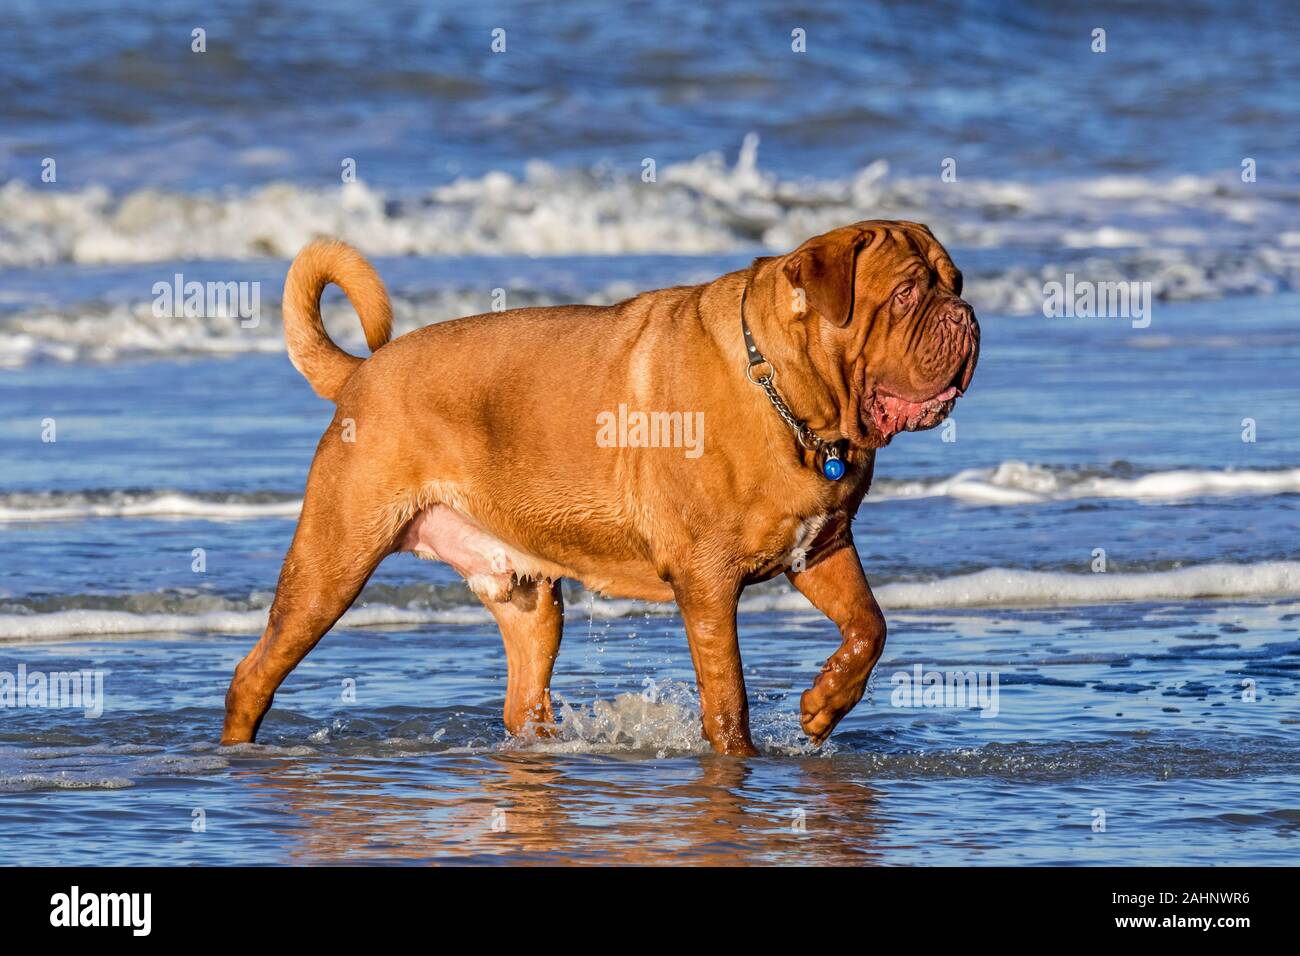 Unleashed Dogue de Bordeaux / French Mastiff / Bordeauxdog, French dog breed paddling in sea water along the North Sea coast Stock Photo